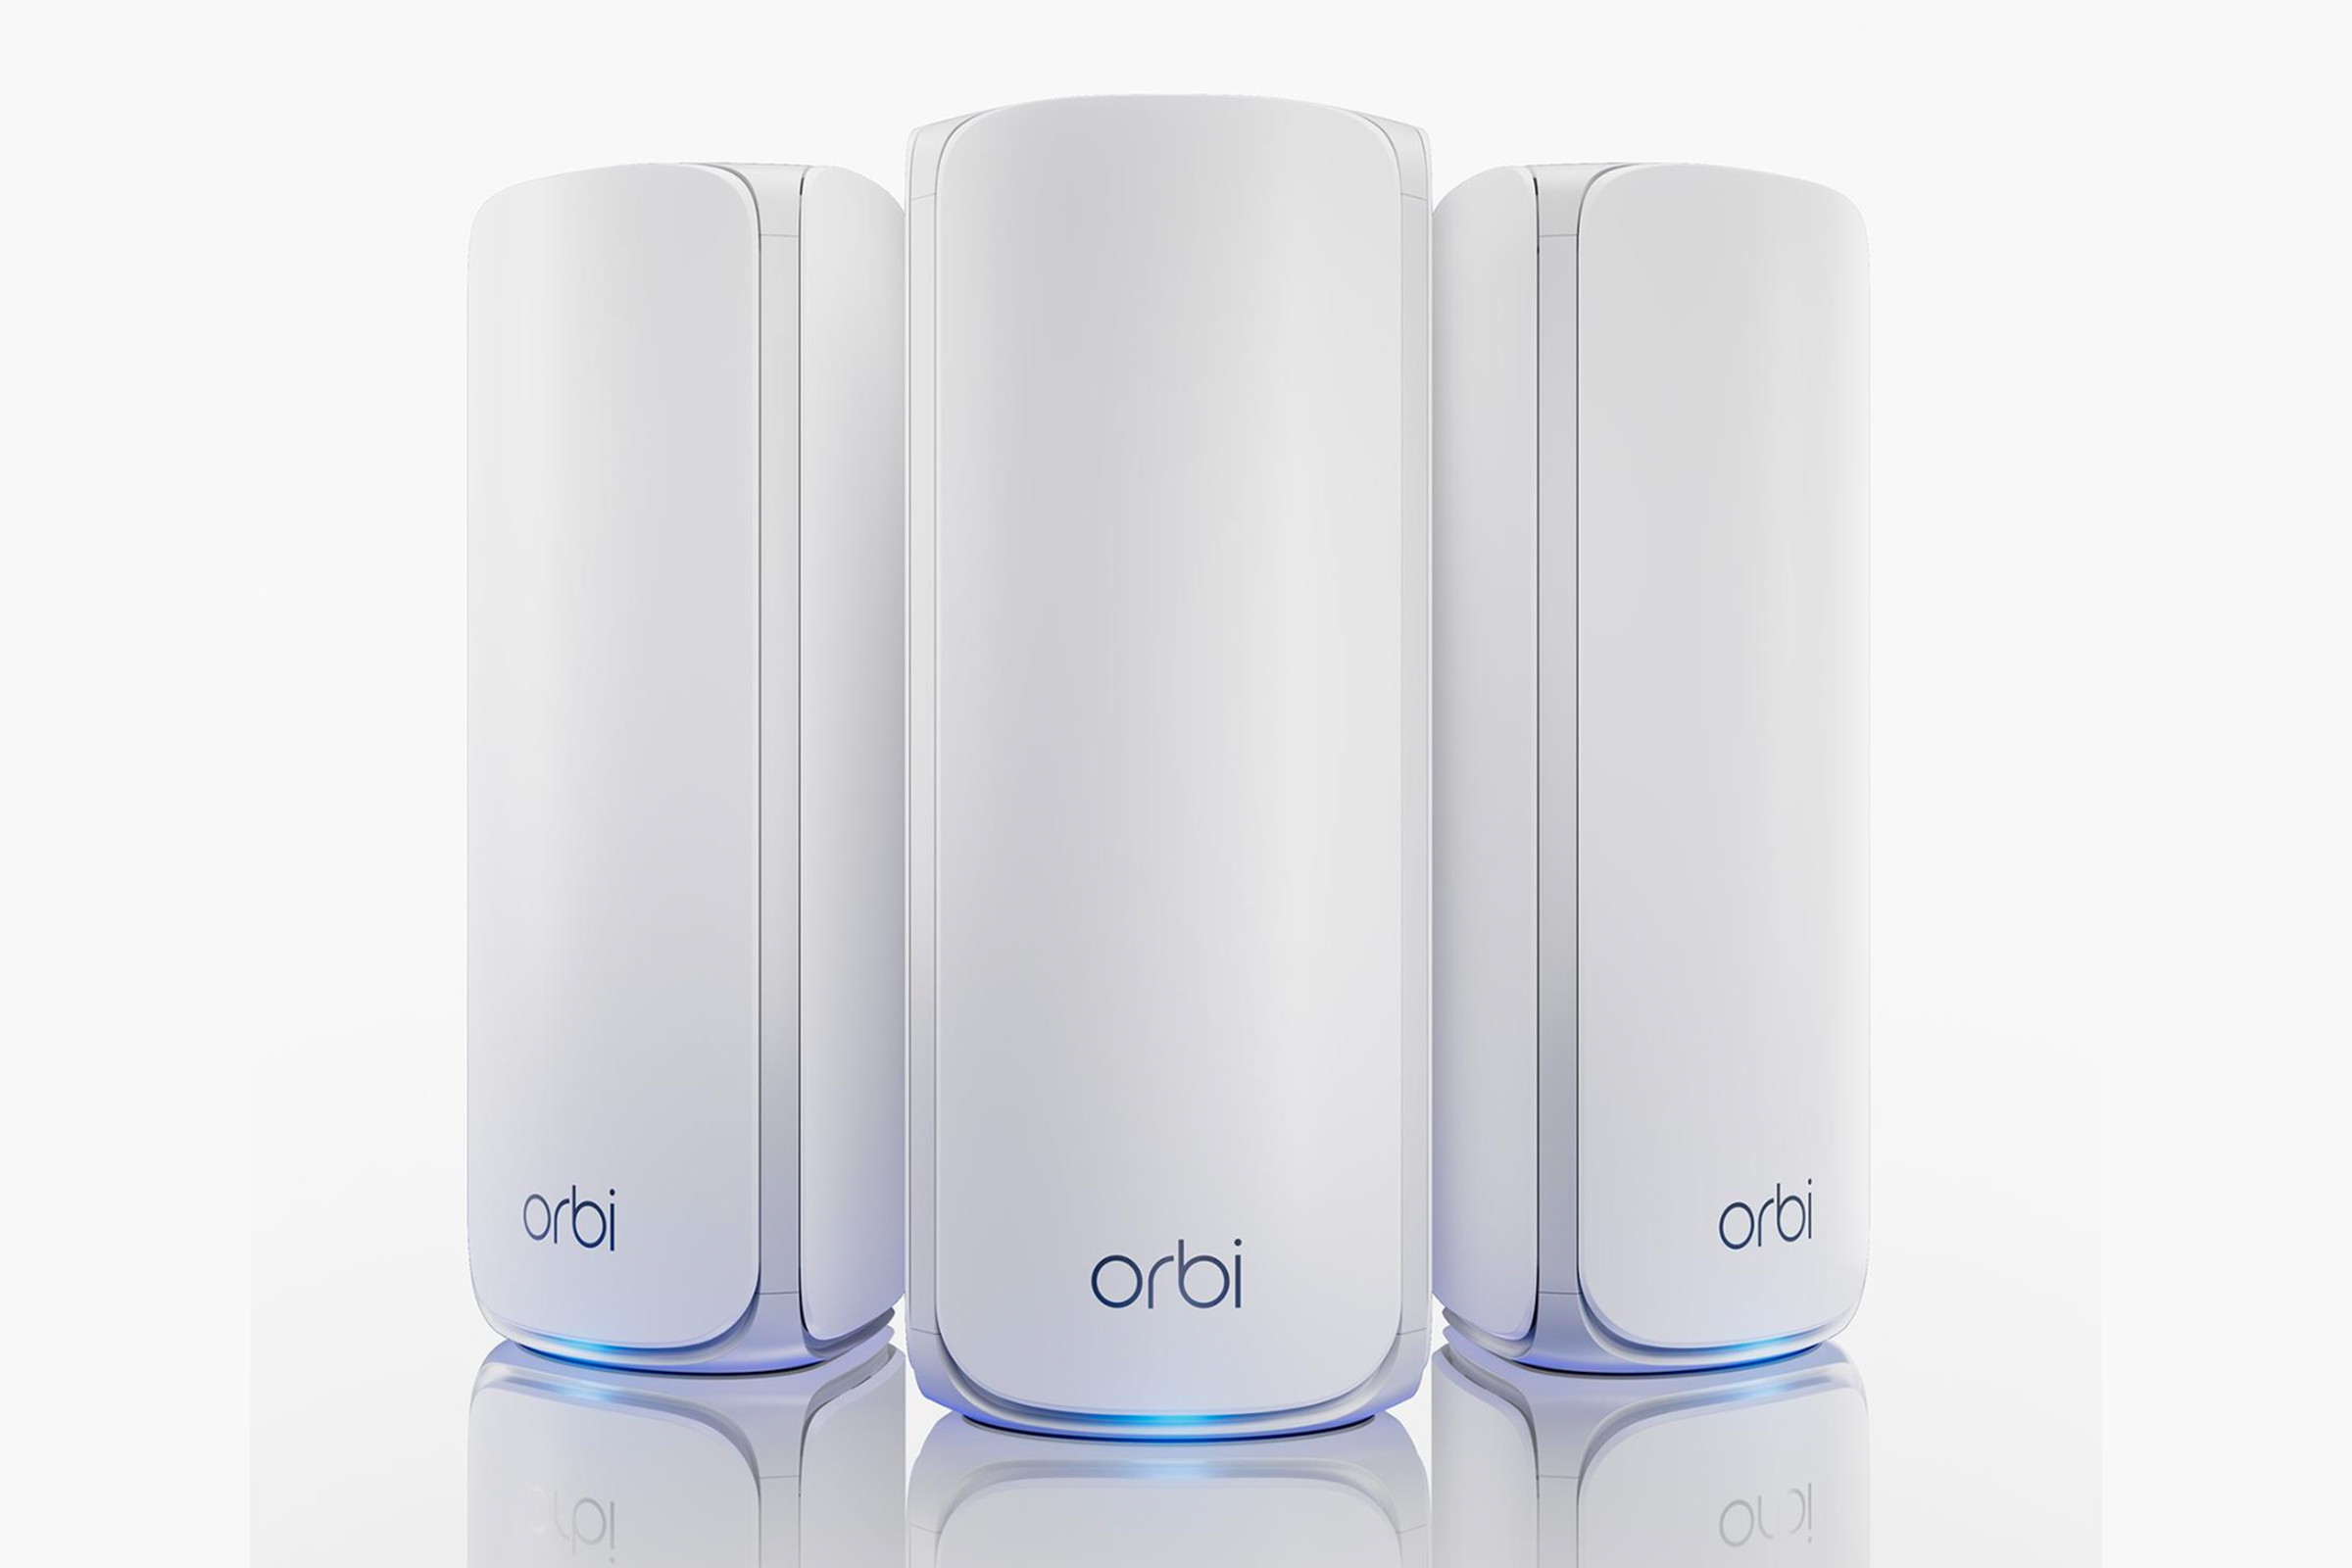 Netgear’s new Orbi mesh and Nighthawk routers are a cheaper way into Wi-Fi 7